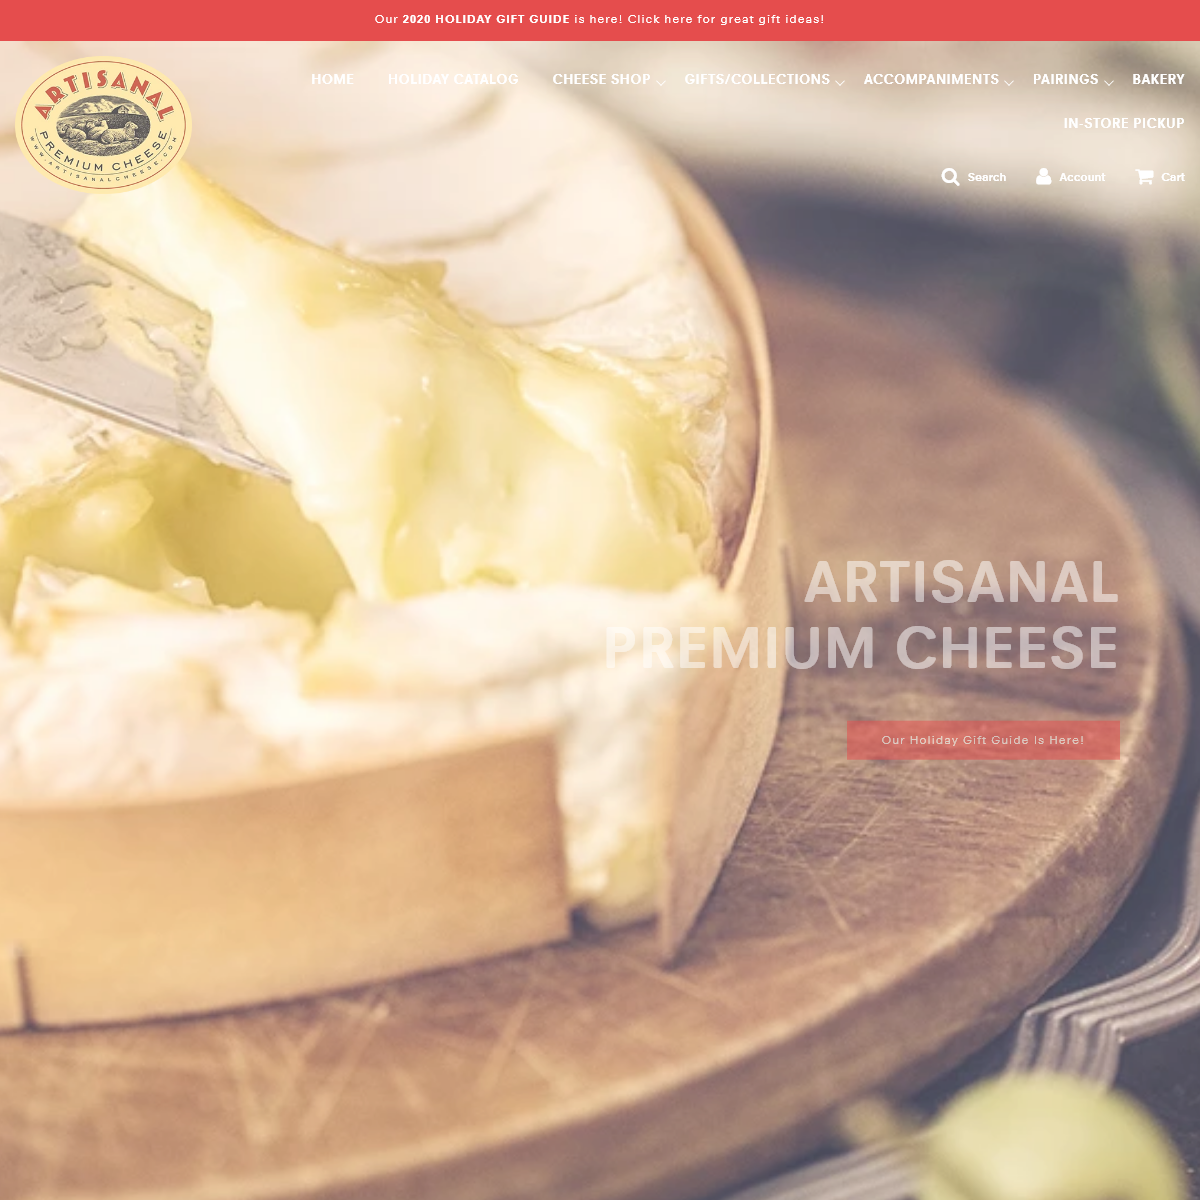 A complete backup of artisanalcheese.com